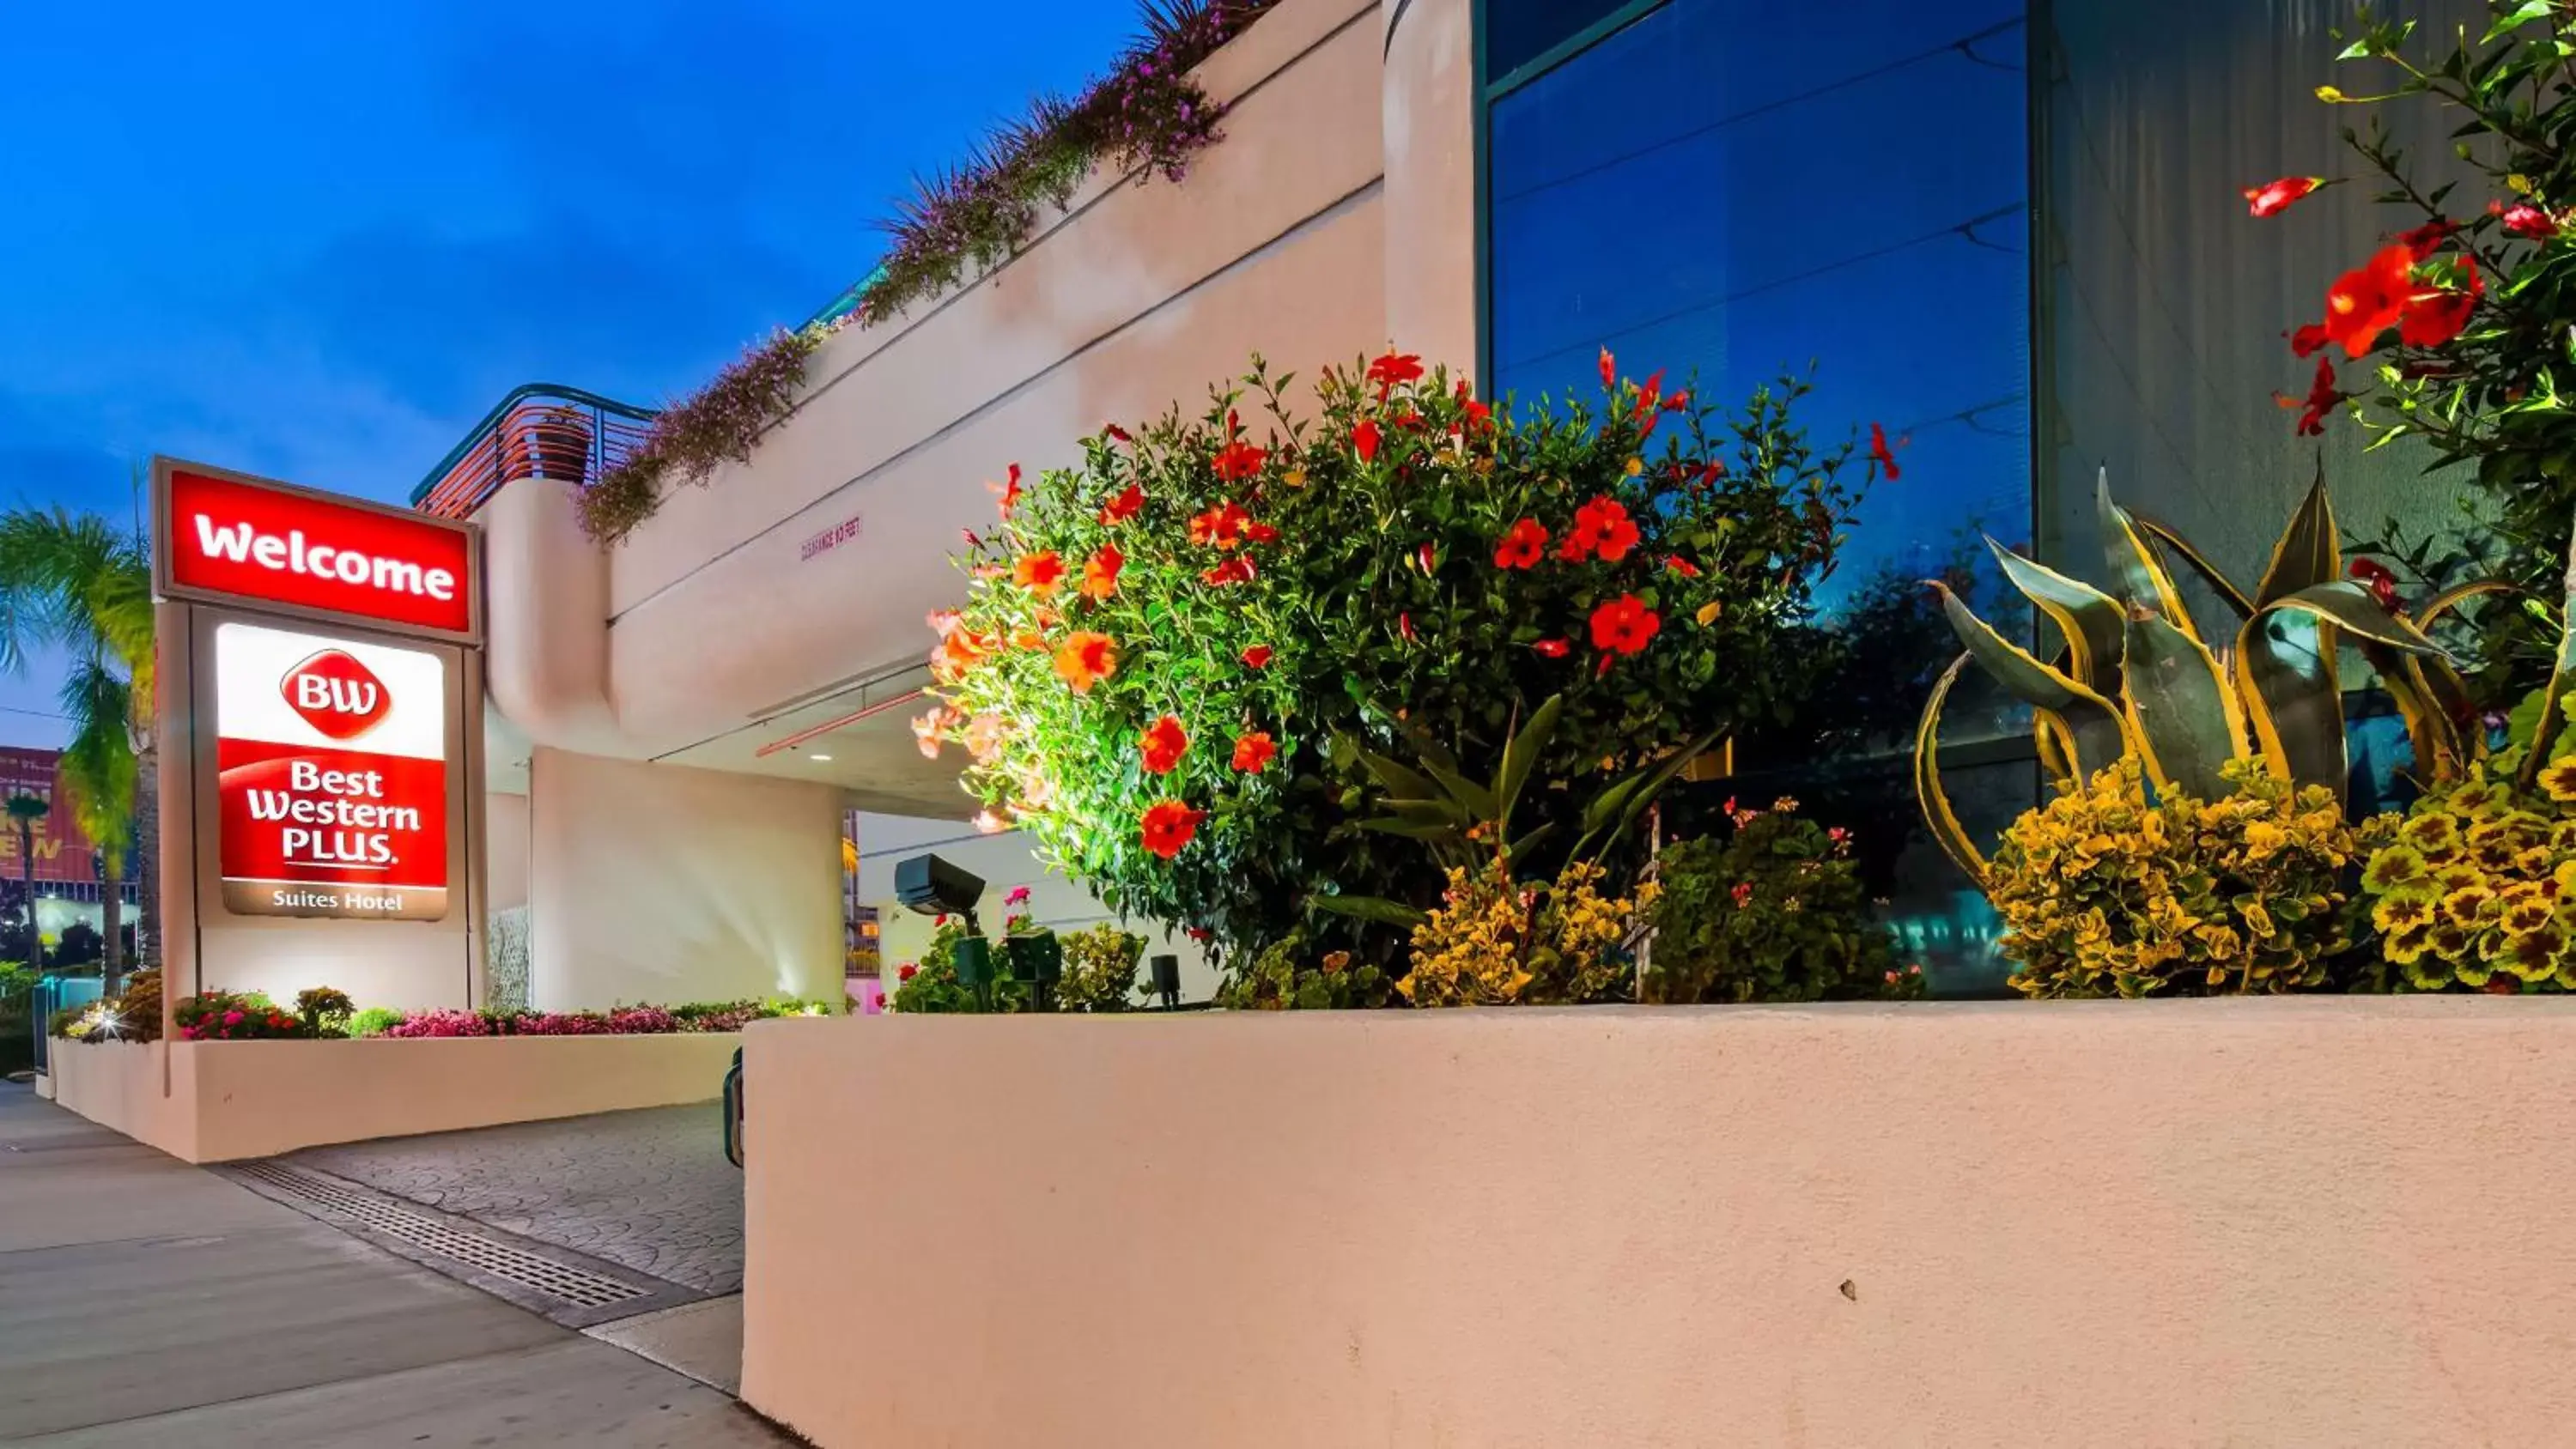 Property Building in Best Western Plus Suites Hotel - Los Angeles LAX Airport